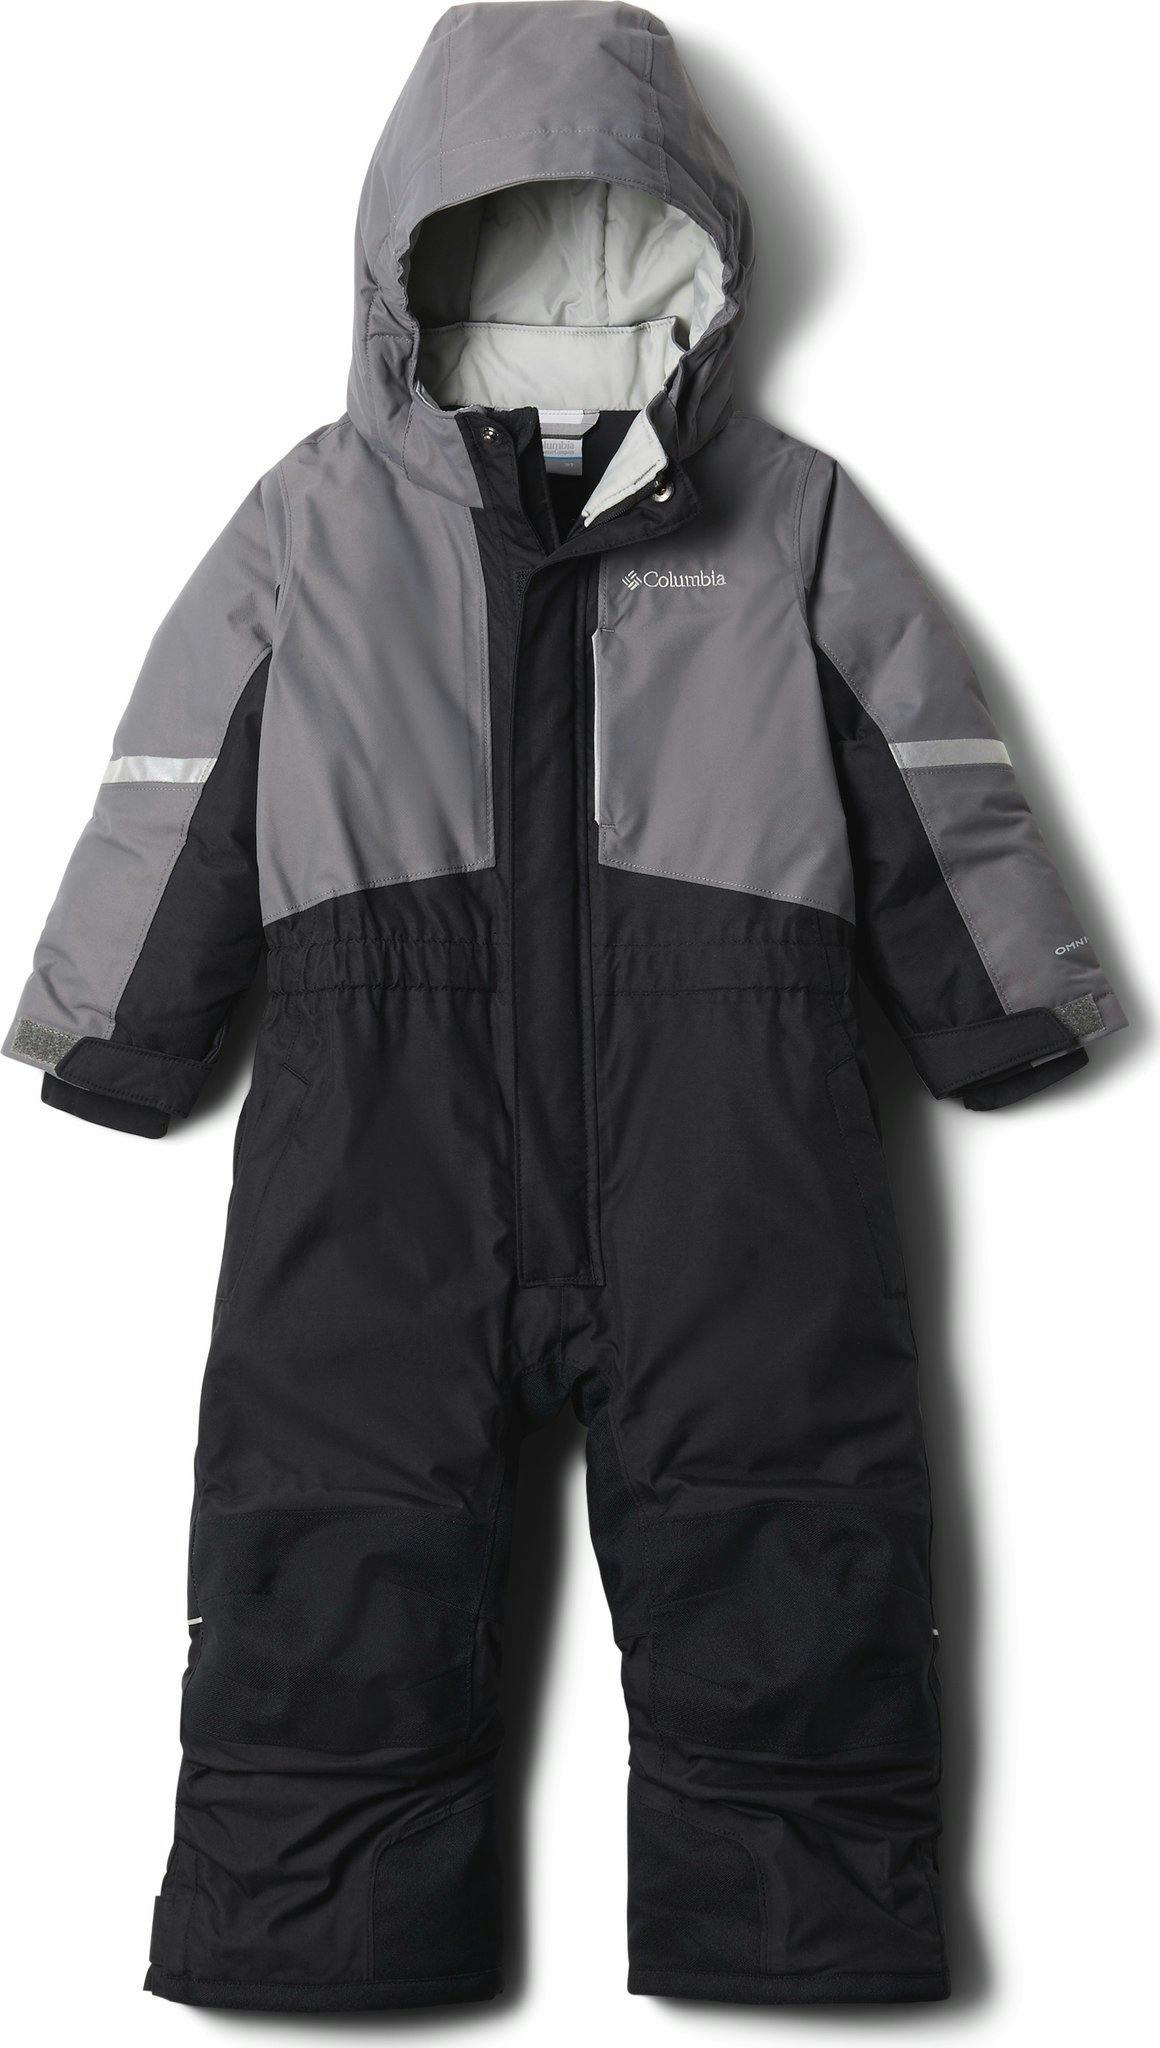 Product image for Buga II Snow Suit - Kids